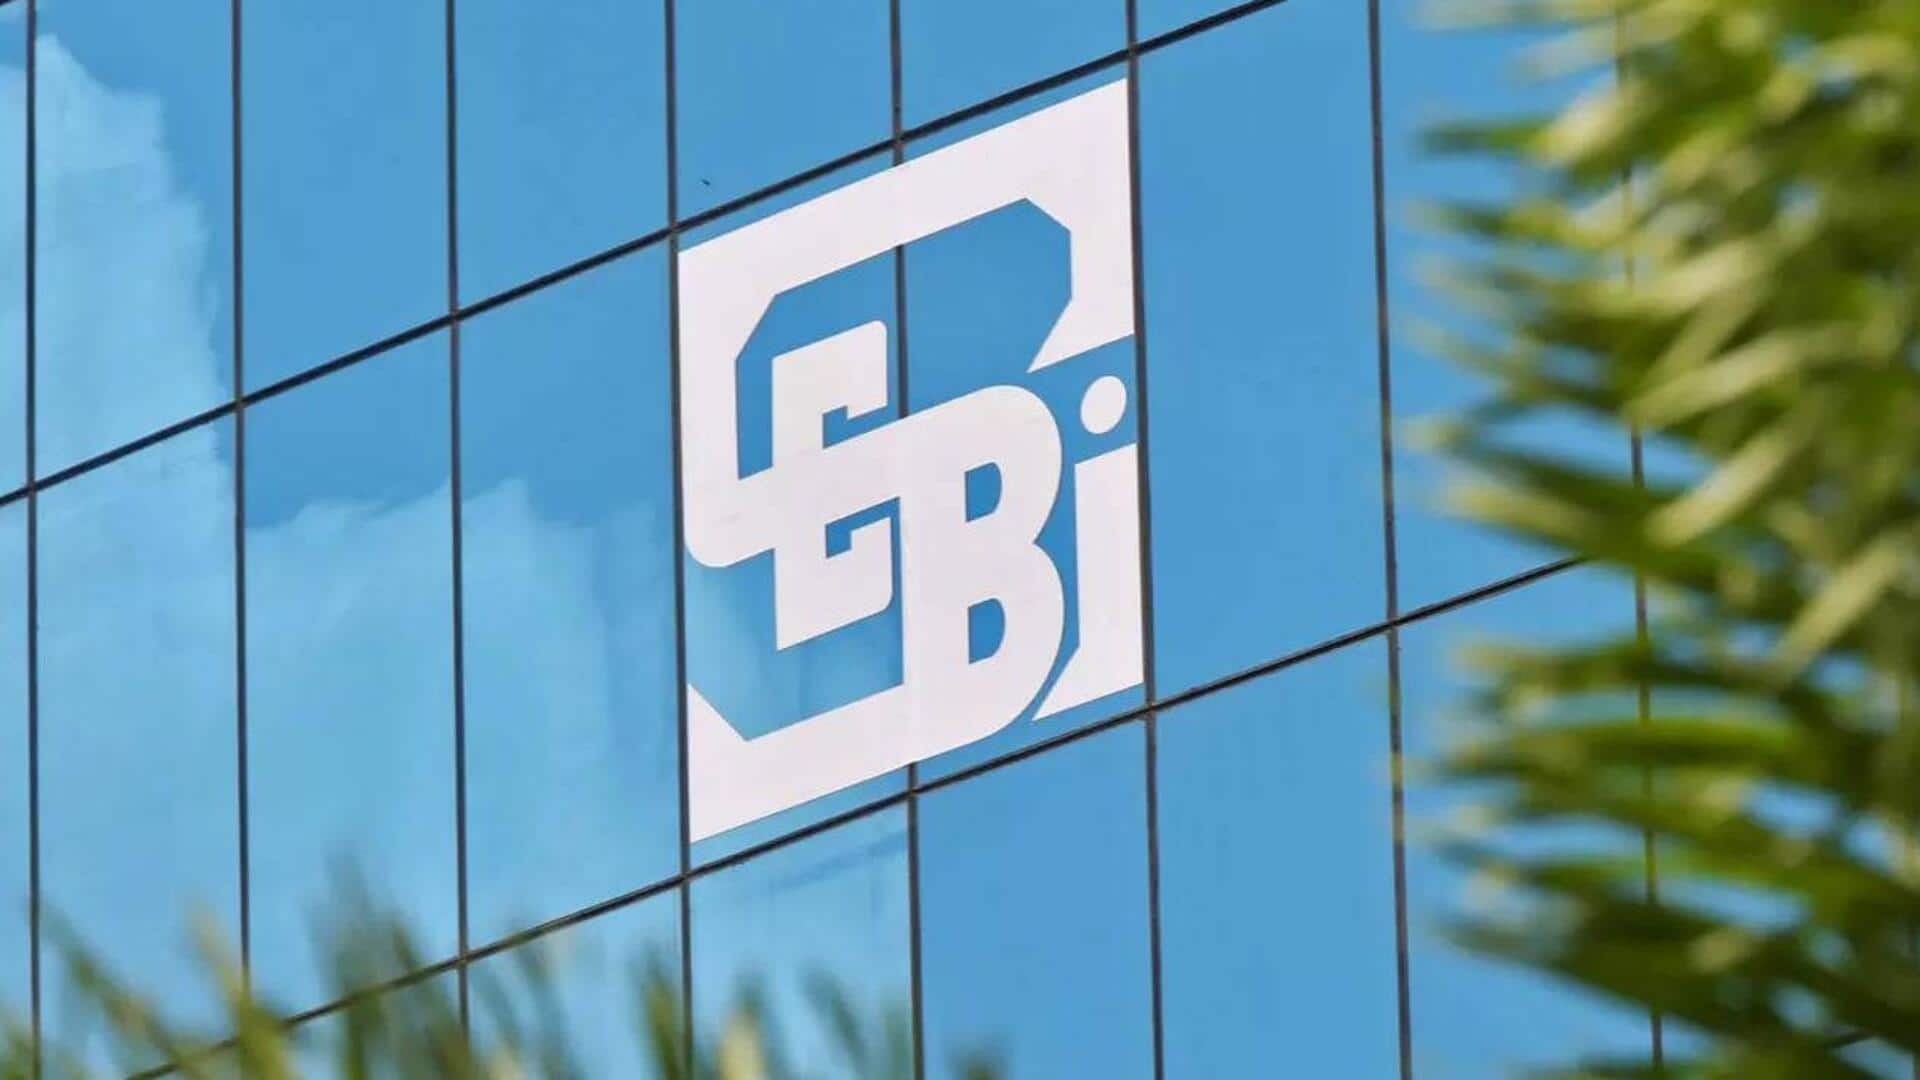 SEBI assures SC of timely conclusion of Adani Group's investigation